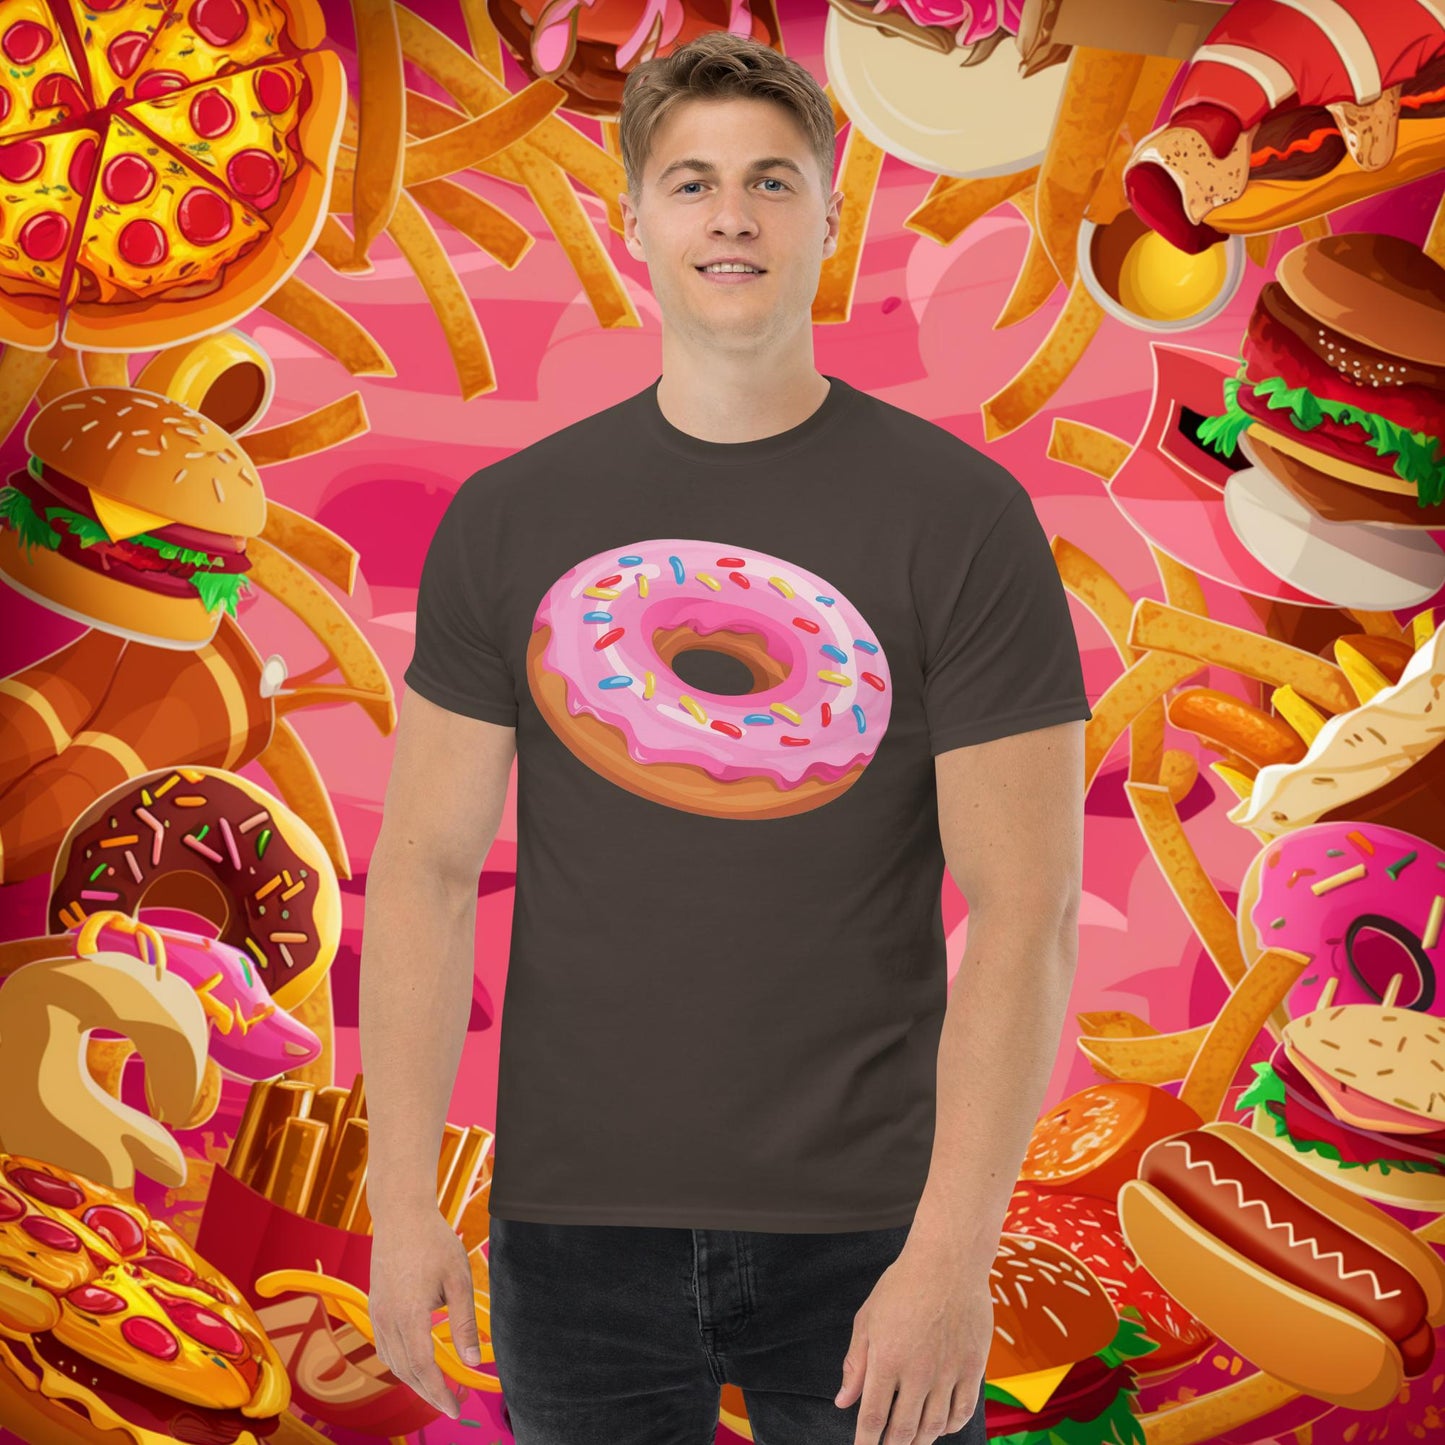 Pink Donut with sprinkles tee Next Cult Brand